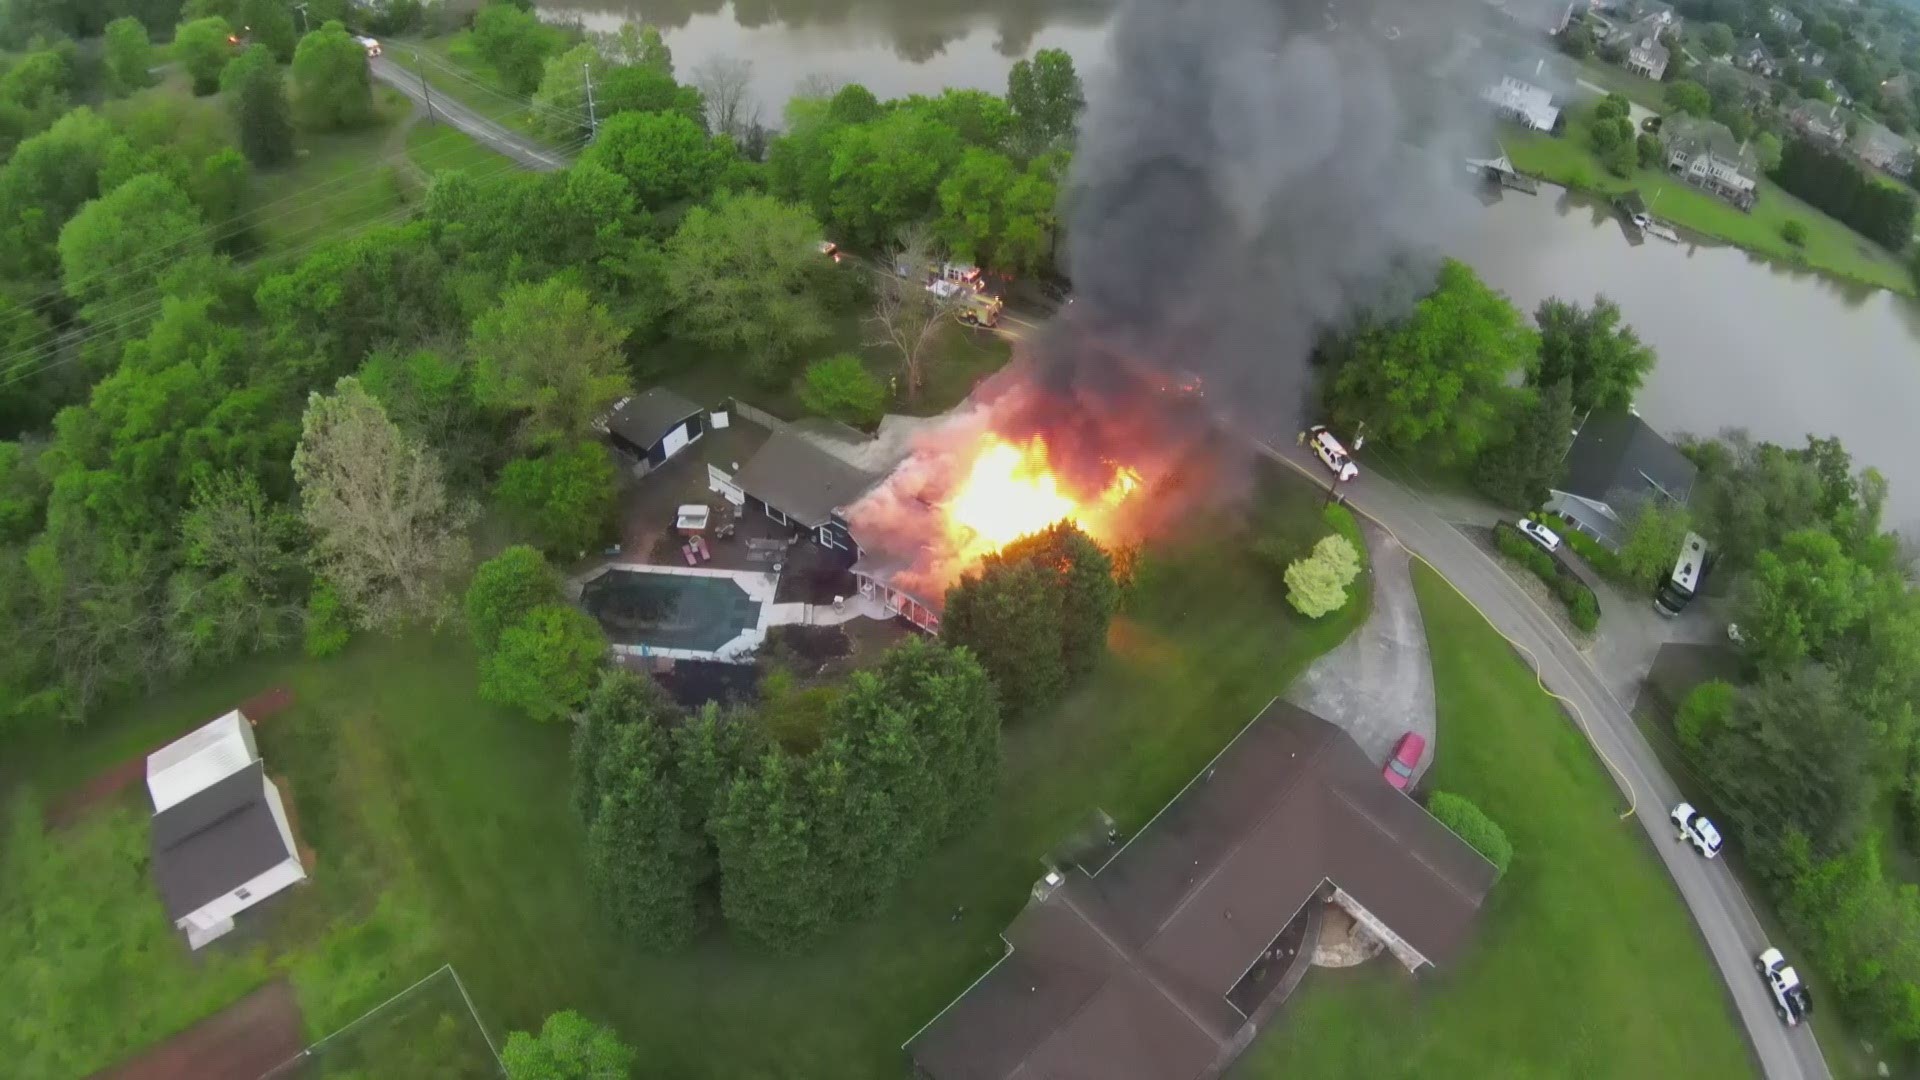 West Knox County house fire. Video courtesy of Aaron Cassity.